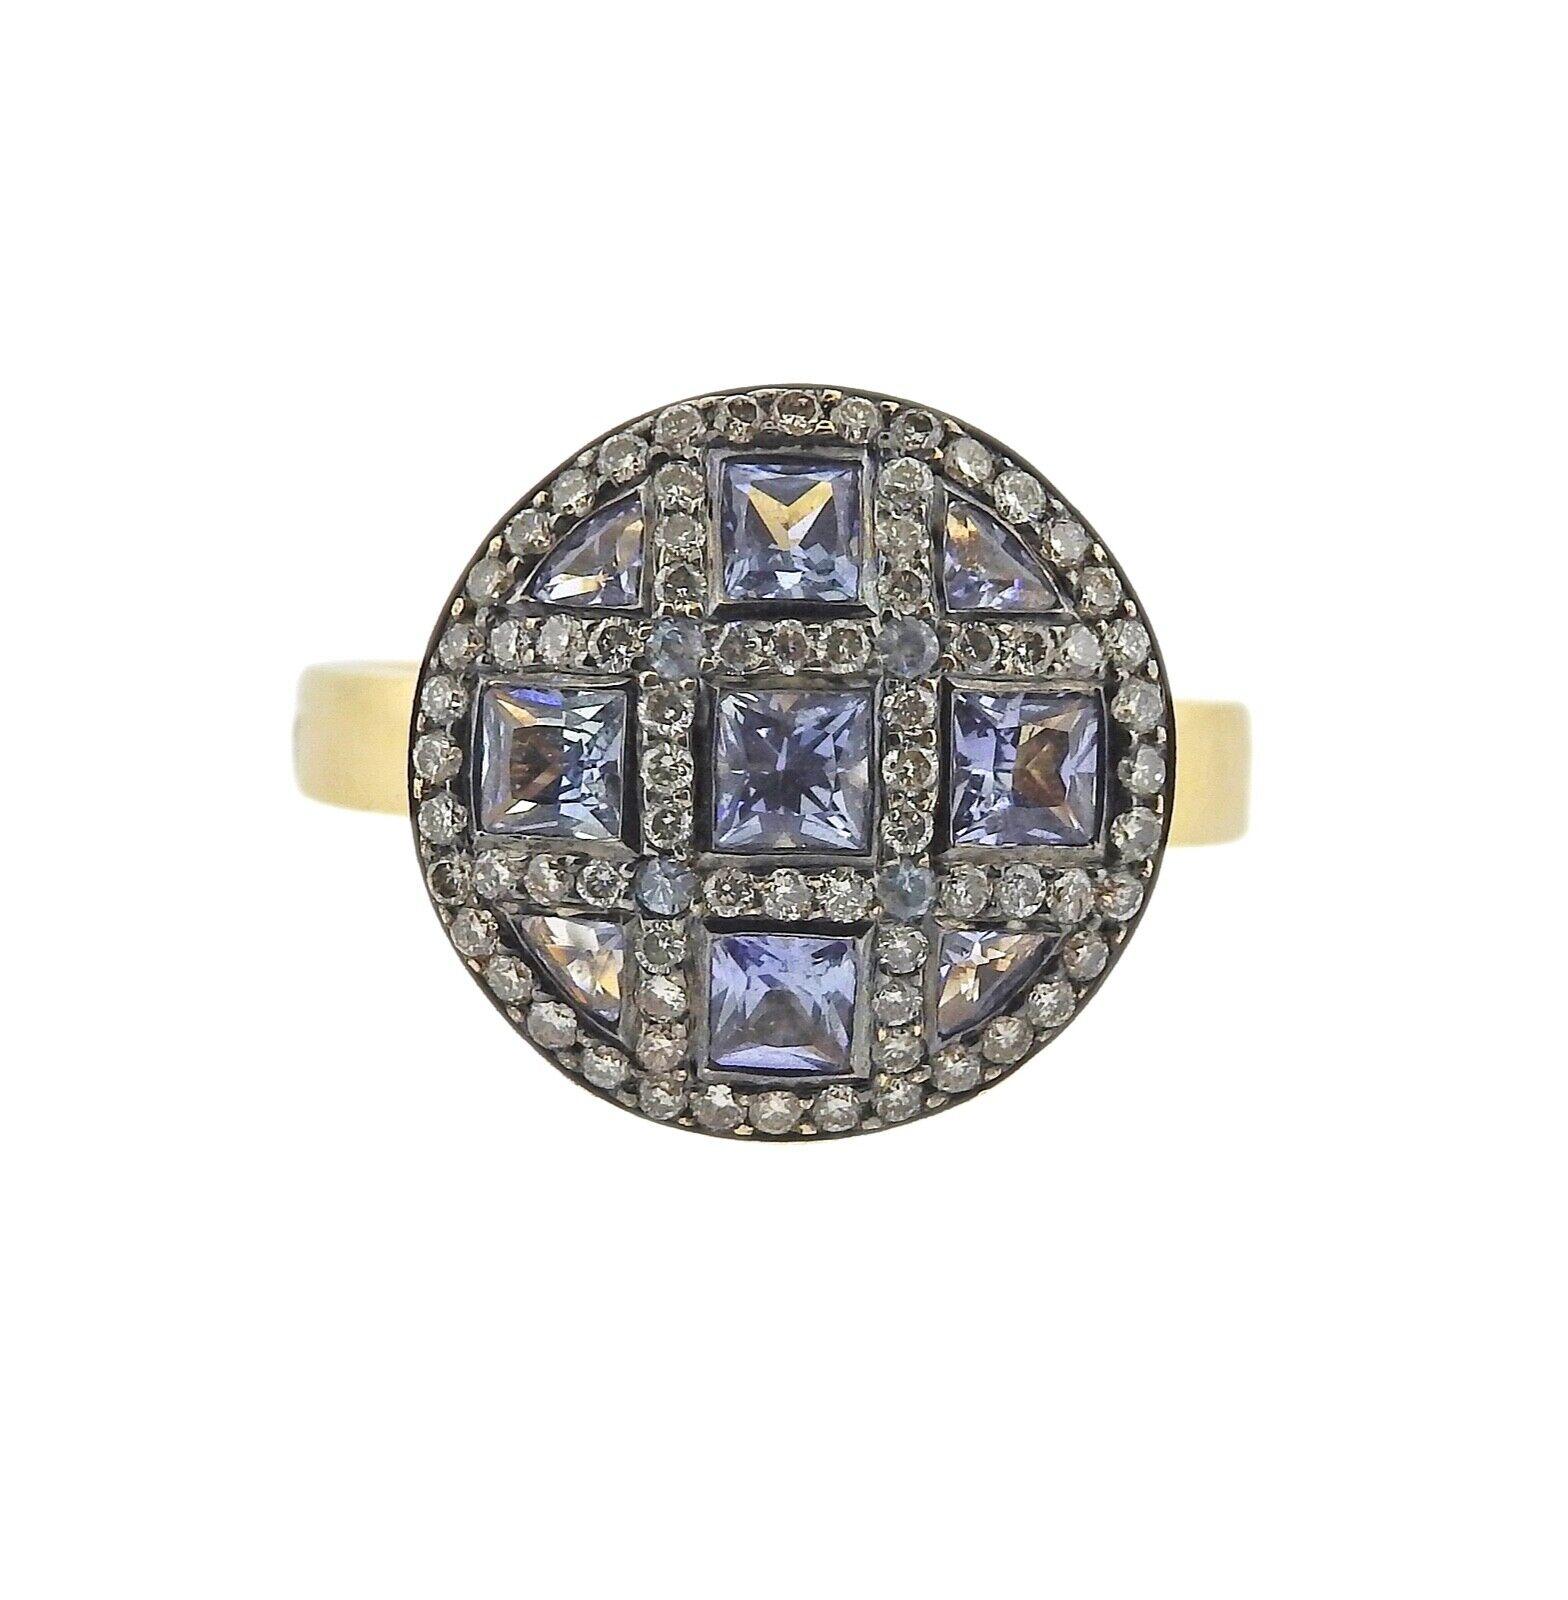 Zorab 18k yellow gold ring, features approx 0.22ctw in SI H-I in diamonds and blue sapphires. Ring size 7.25, top measures 15mm in diameter. Marked: Zorab, 750. Weight is 6.0 grams.